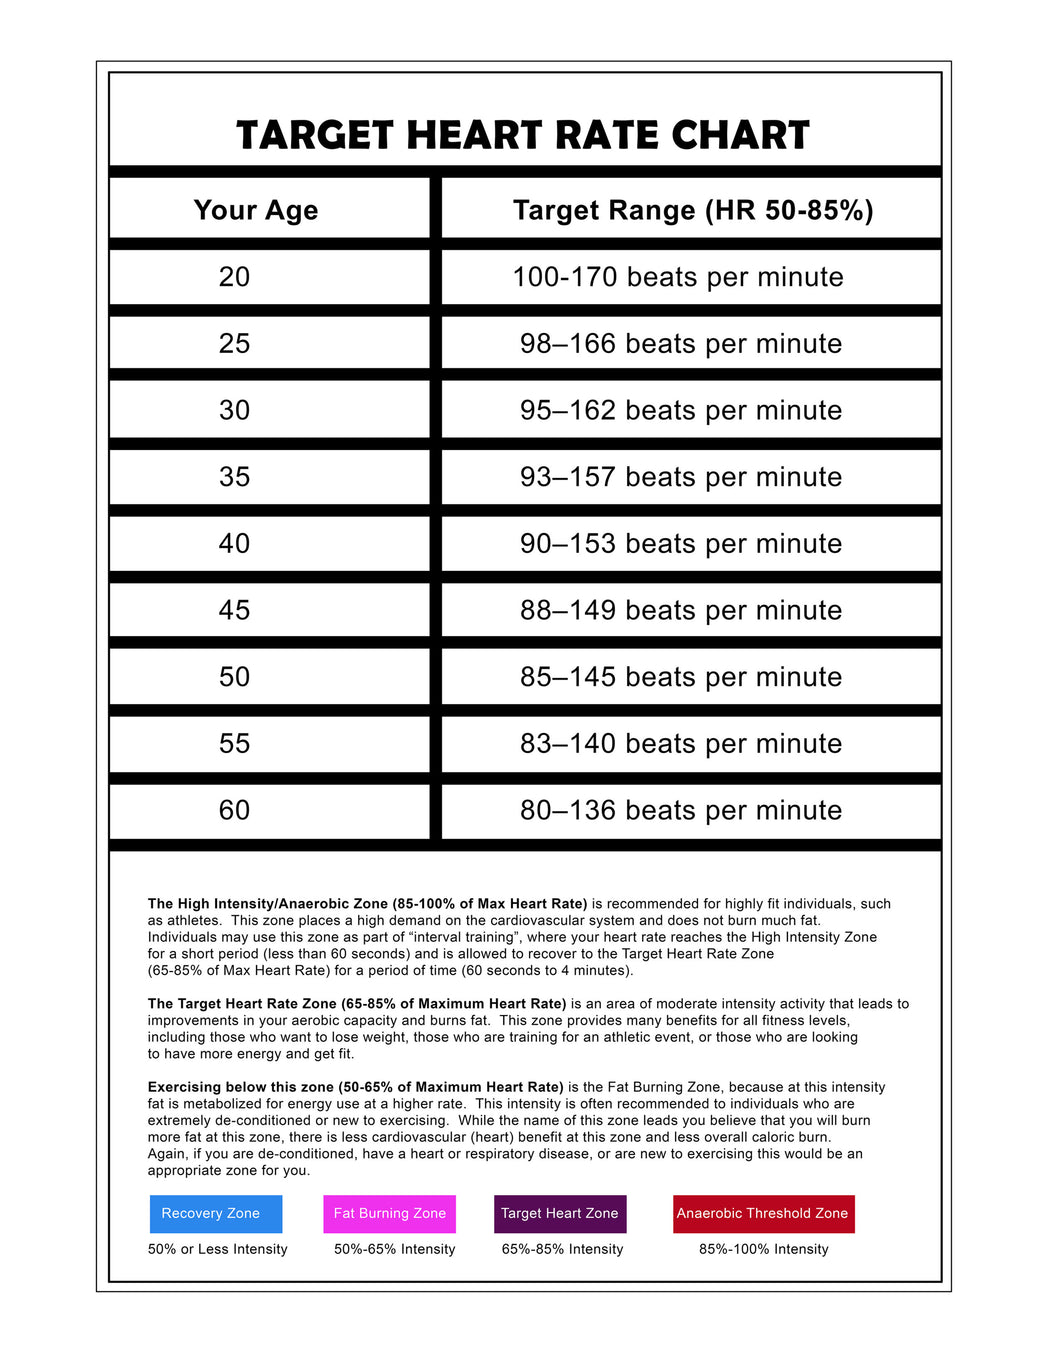 Target Heart Rate Chart (17